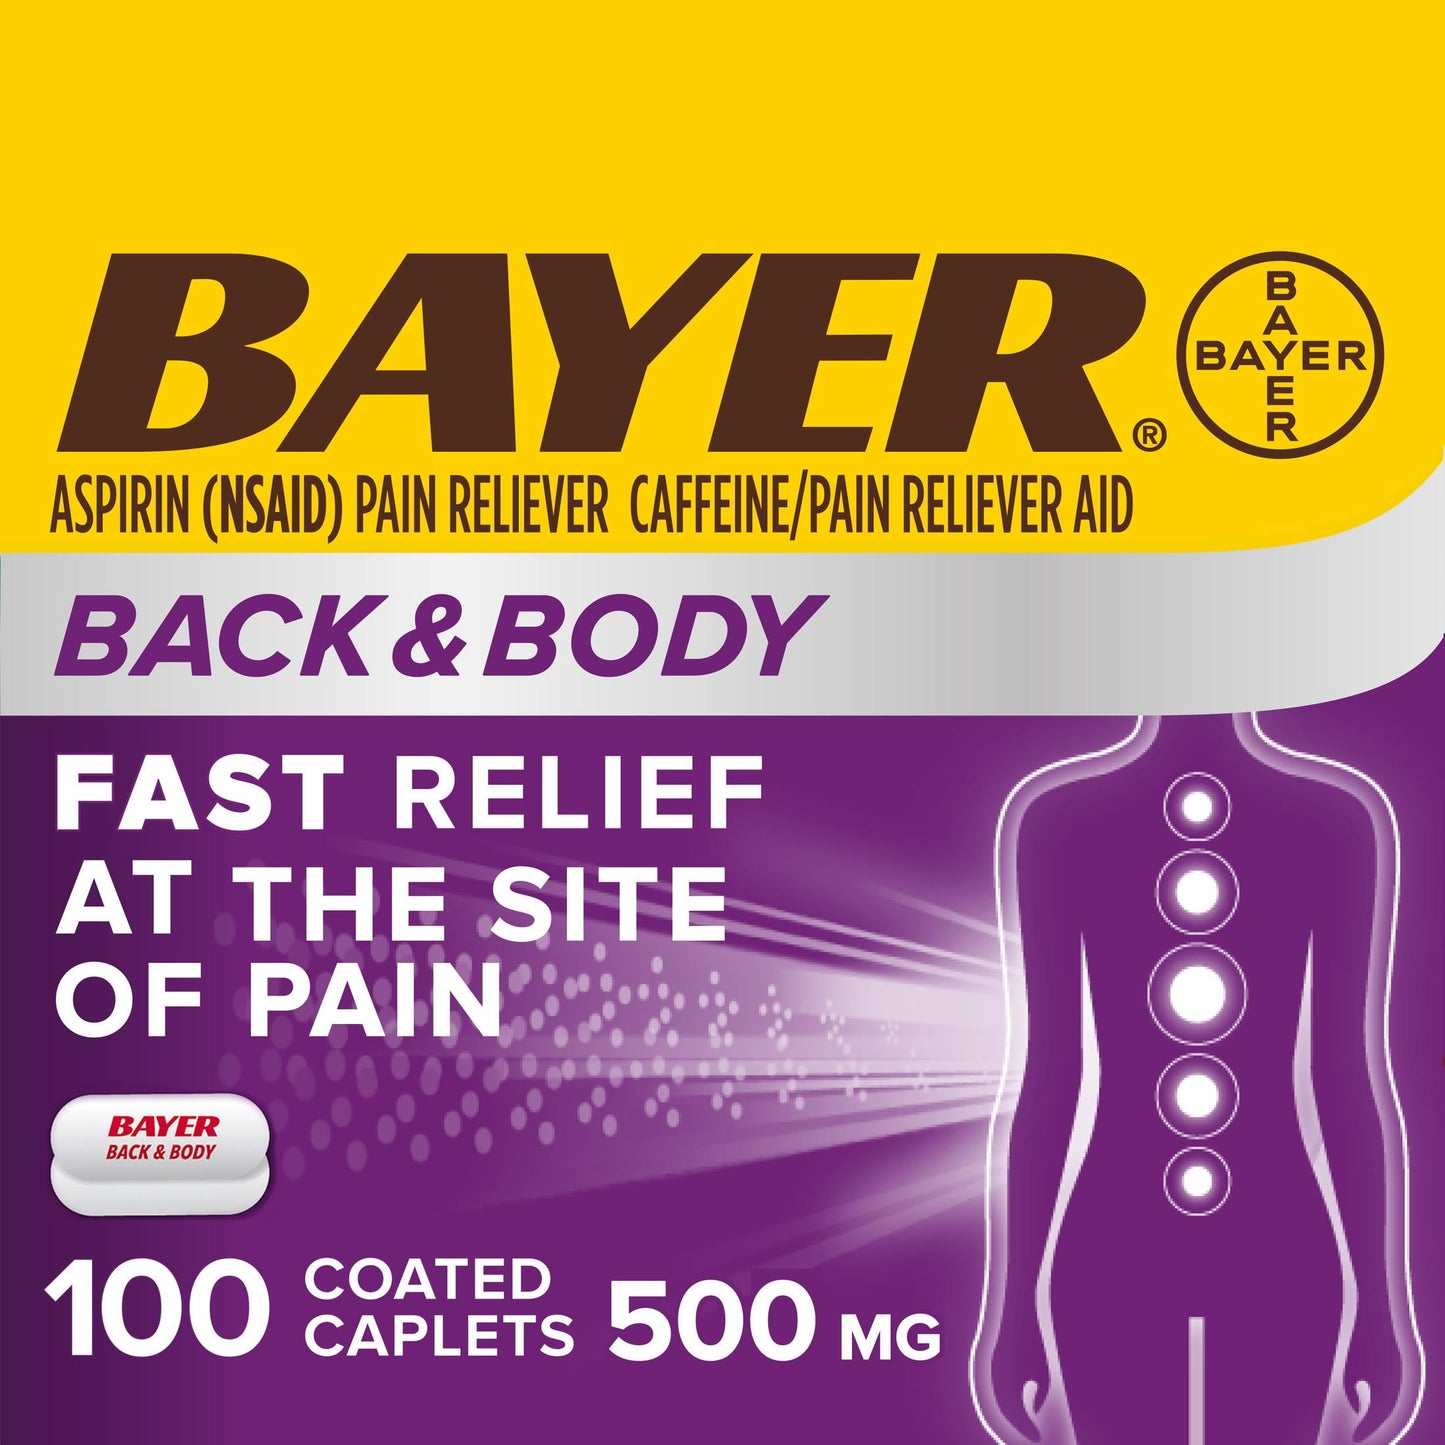 Bayer Back & Body Extra Strength Pain Reliever Aspirin w Caffeine, 500mg Coated Tablets, 100 Count